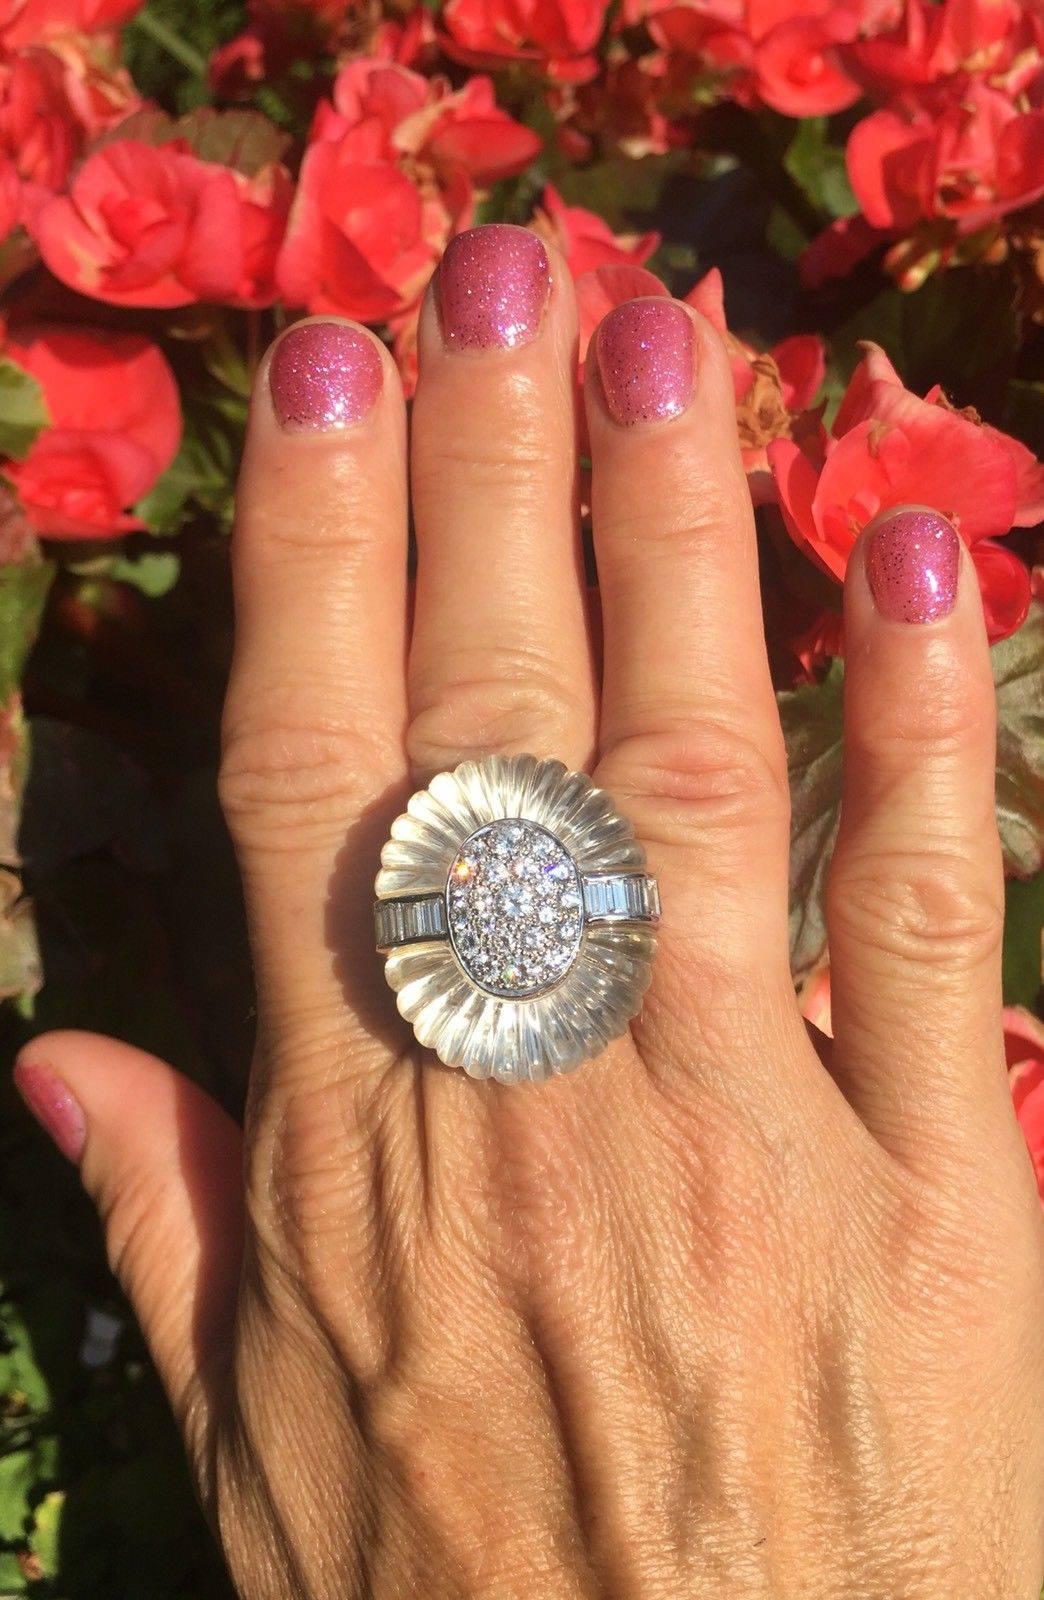 This impressive ring is part of a set of carved rock crystal and diamonds. The 18k white gold ring is a bombé design set with a pavé-set circular-cut diamond center flanked by a row of channel-set baguette diamonds, total estimated weight of 2.75